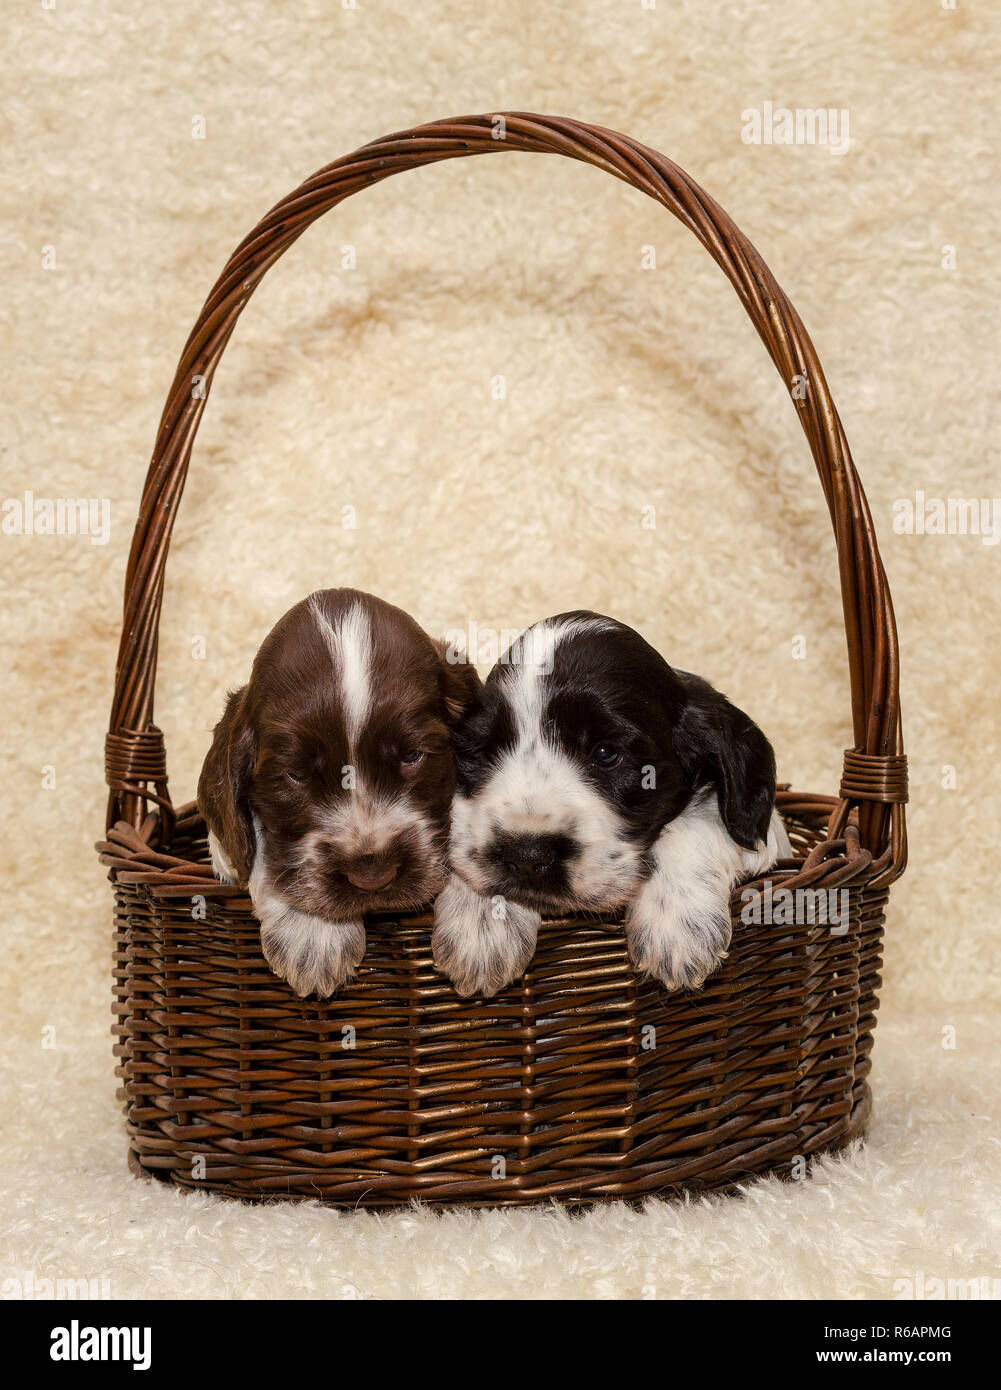 two puppy of brown English Cocker Spaniel dog Stock Photo